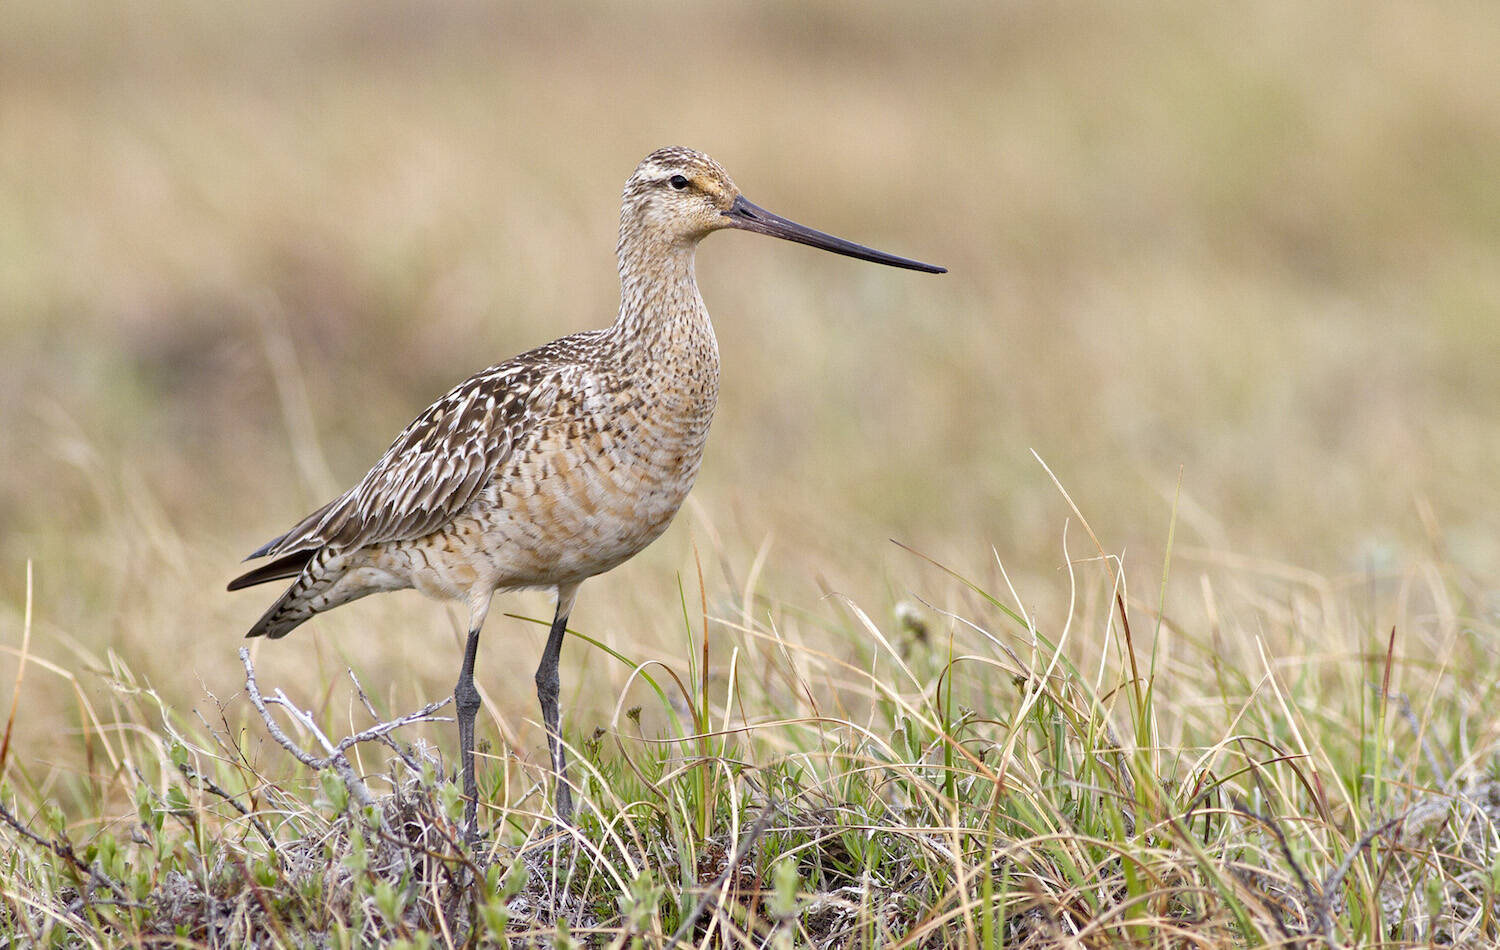 A bar-tailed godwit born in Alaska that undertakes one of the greatest non-stop migrations in the animal kingdom, often flying from Alaska straight to New Zealand in the fall. (Courtesy Photo / Zachary Pohlen.